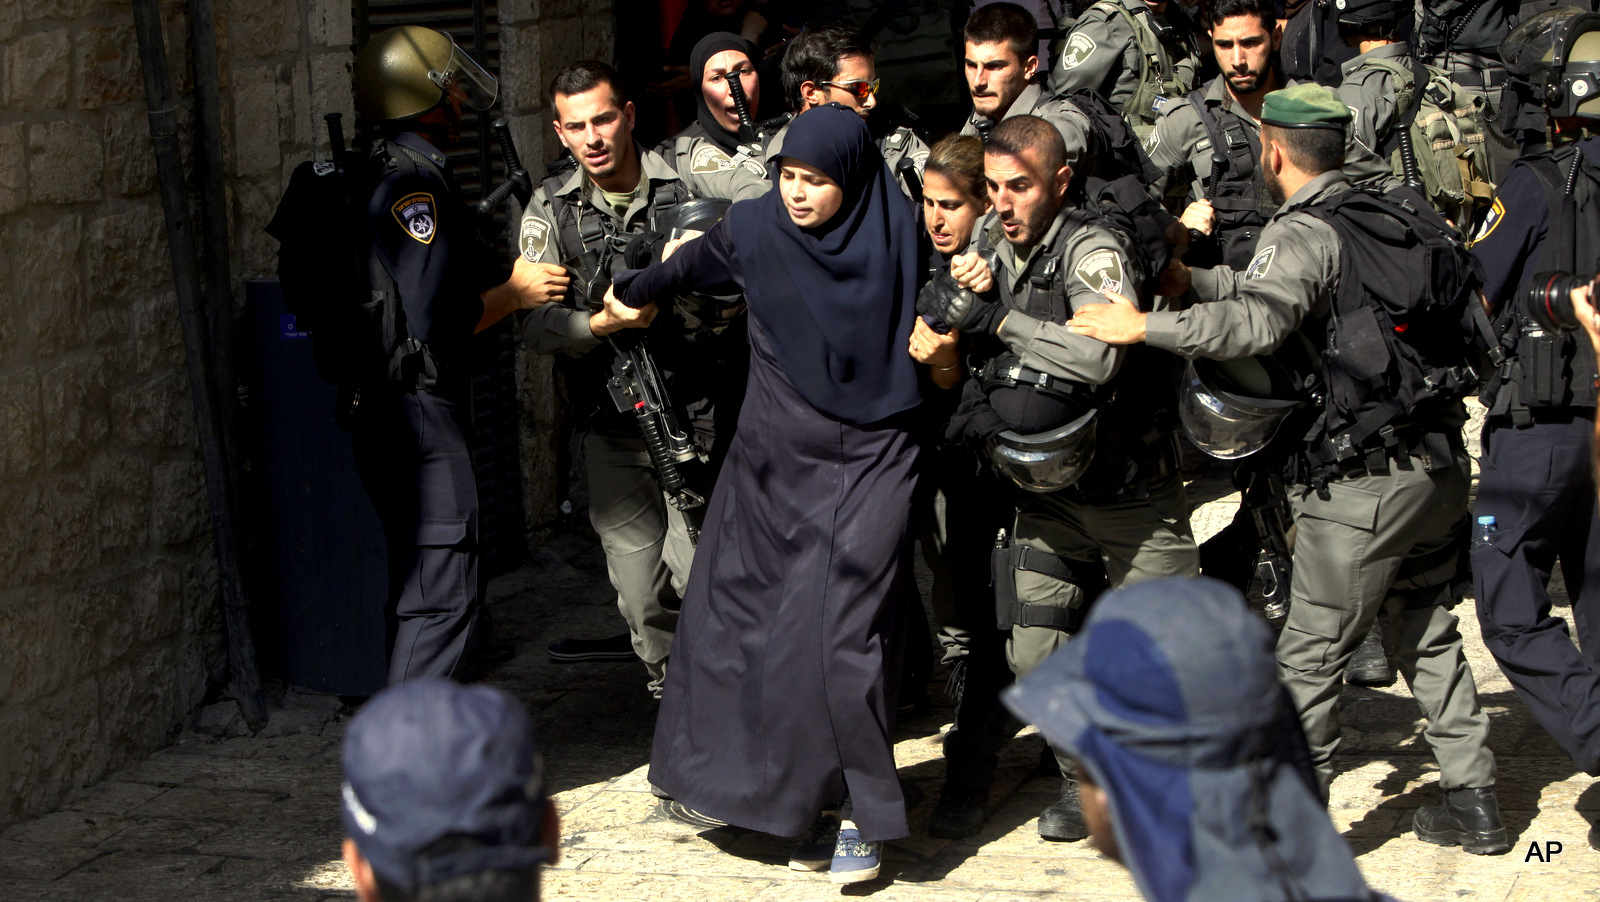 Israeli border police officers scuffle with Palestinian women in the Old City of Jerusalem on Sunday, July 26, 2015. Israeli police said they entered the al-Aqsa Mosque, the second-most holy site for Muslims, to "prevent Arab youths from attacking visiting Jews"